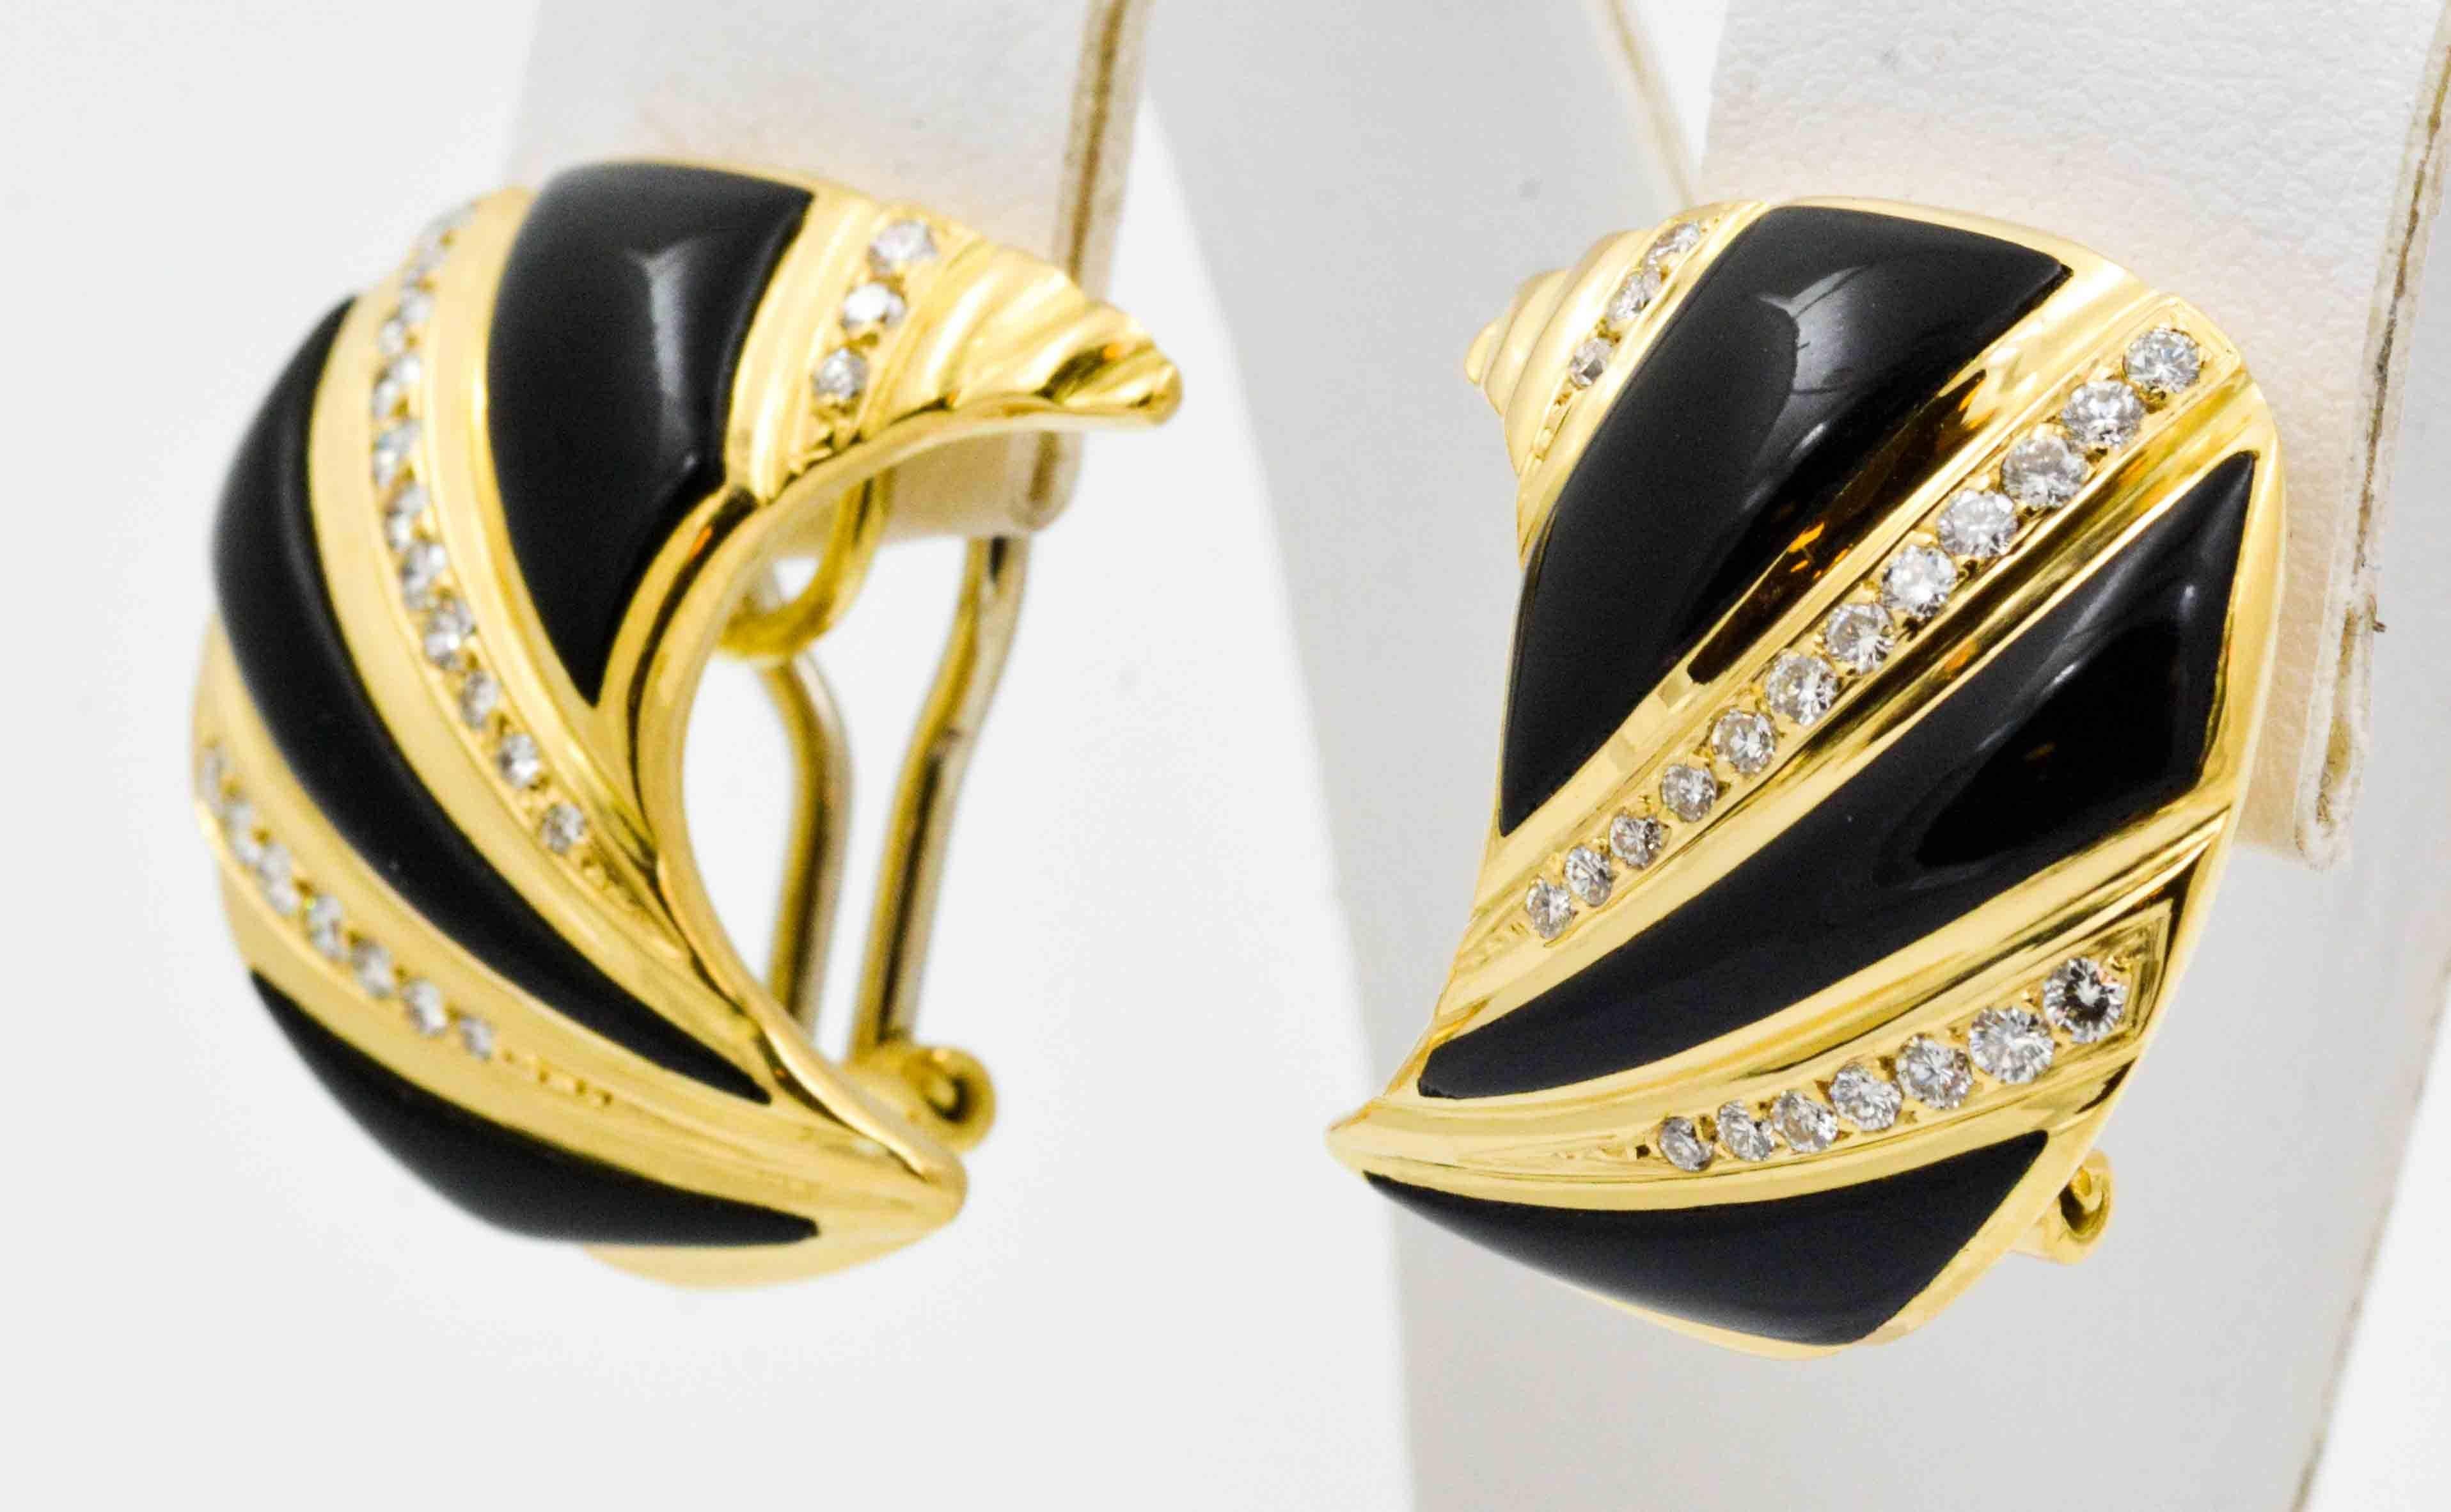 This attractive pair of 18kt yellow gold earrings feature strips of inlay-ed black onyx contrasted with strips of round brilliant cut diamonds.  The pave set round brilliant cut diamonds have an approximate combined weight of 0.75 carats total.  The